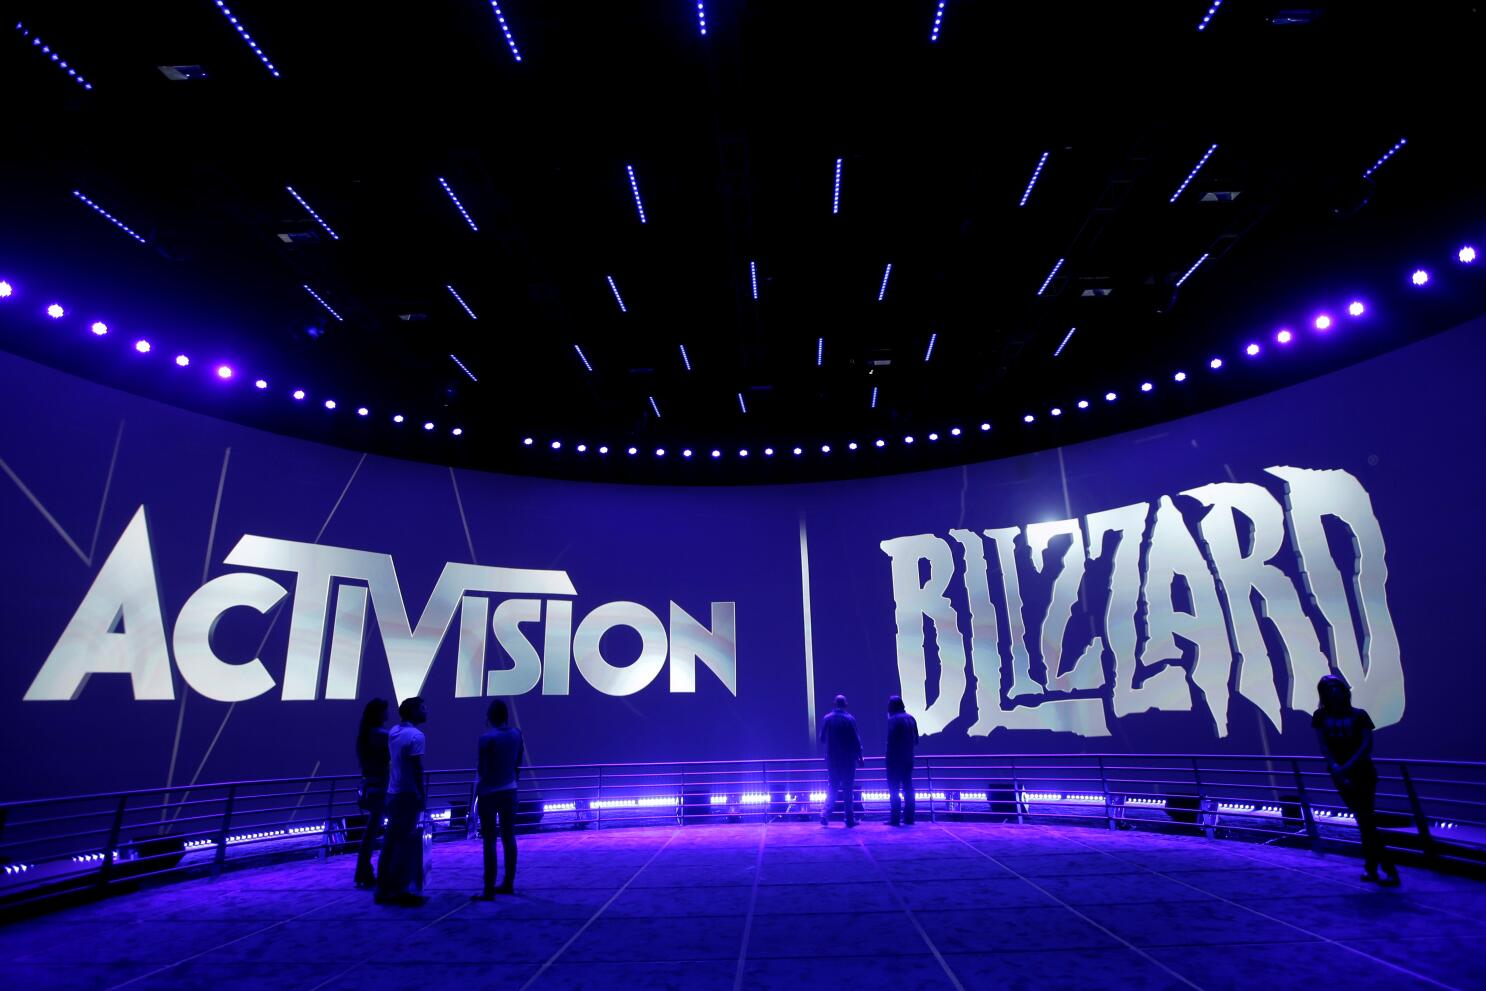 Activision Blizzard Games On Track for Now, But COVID-19 May Force